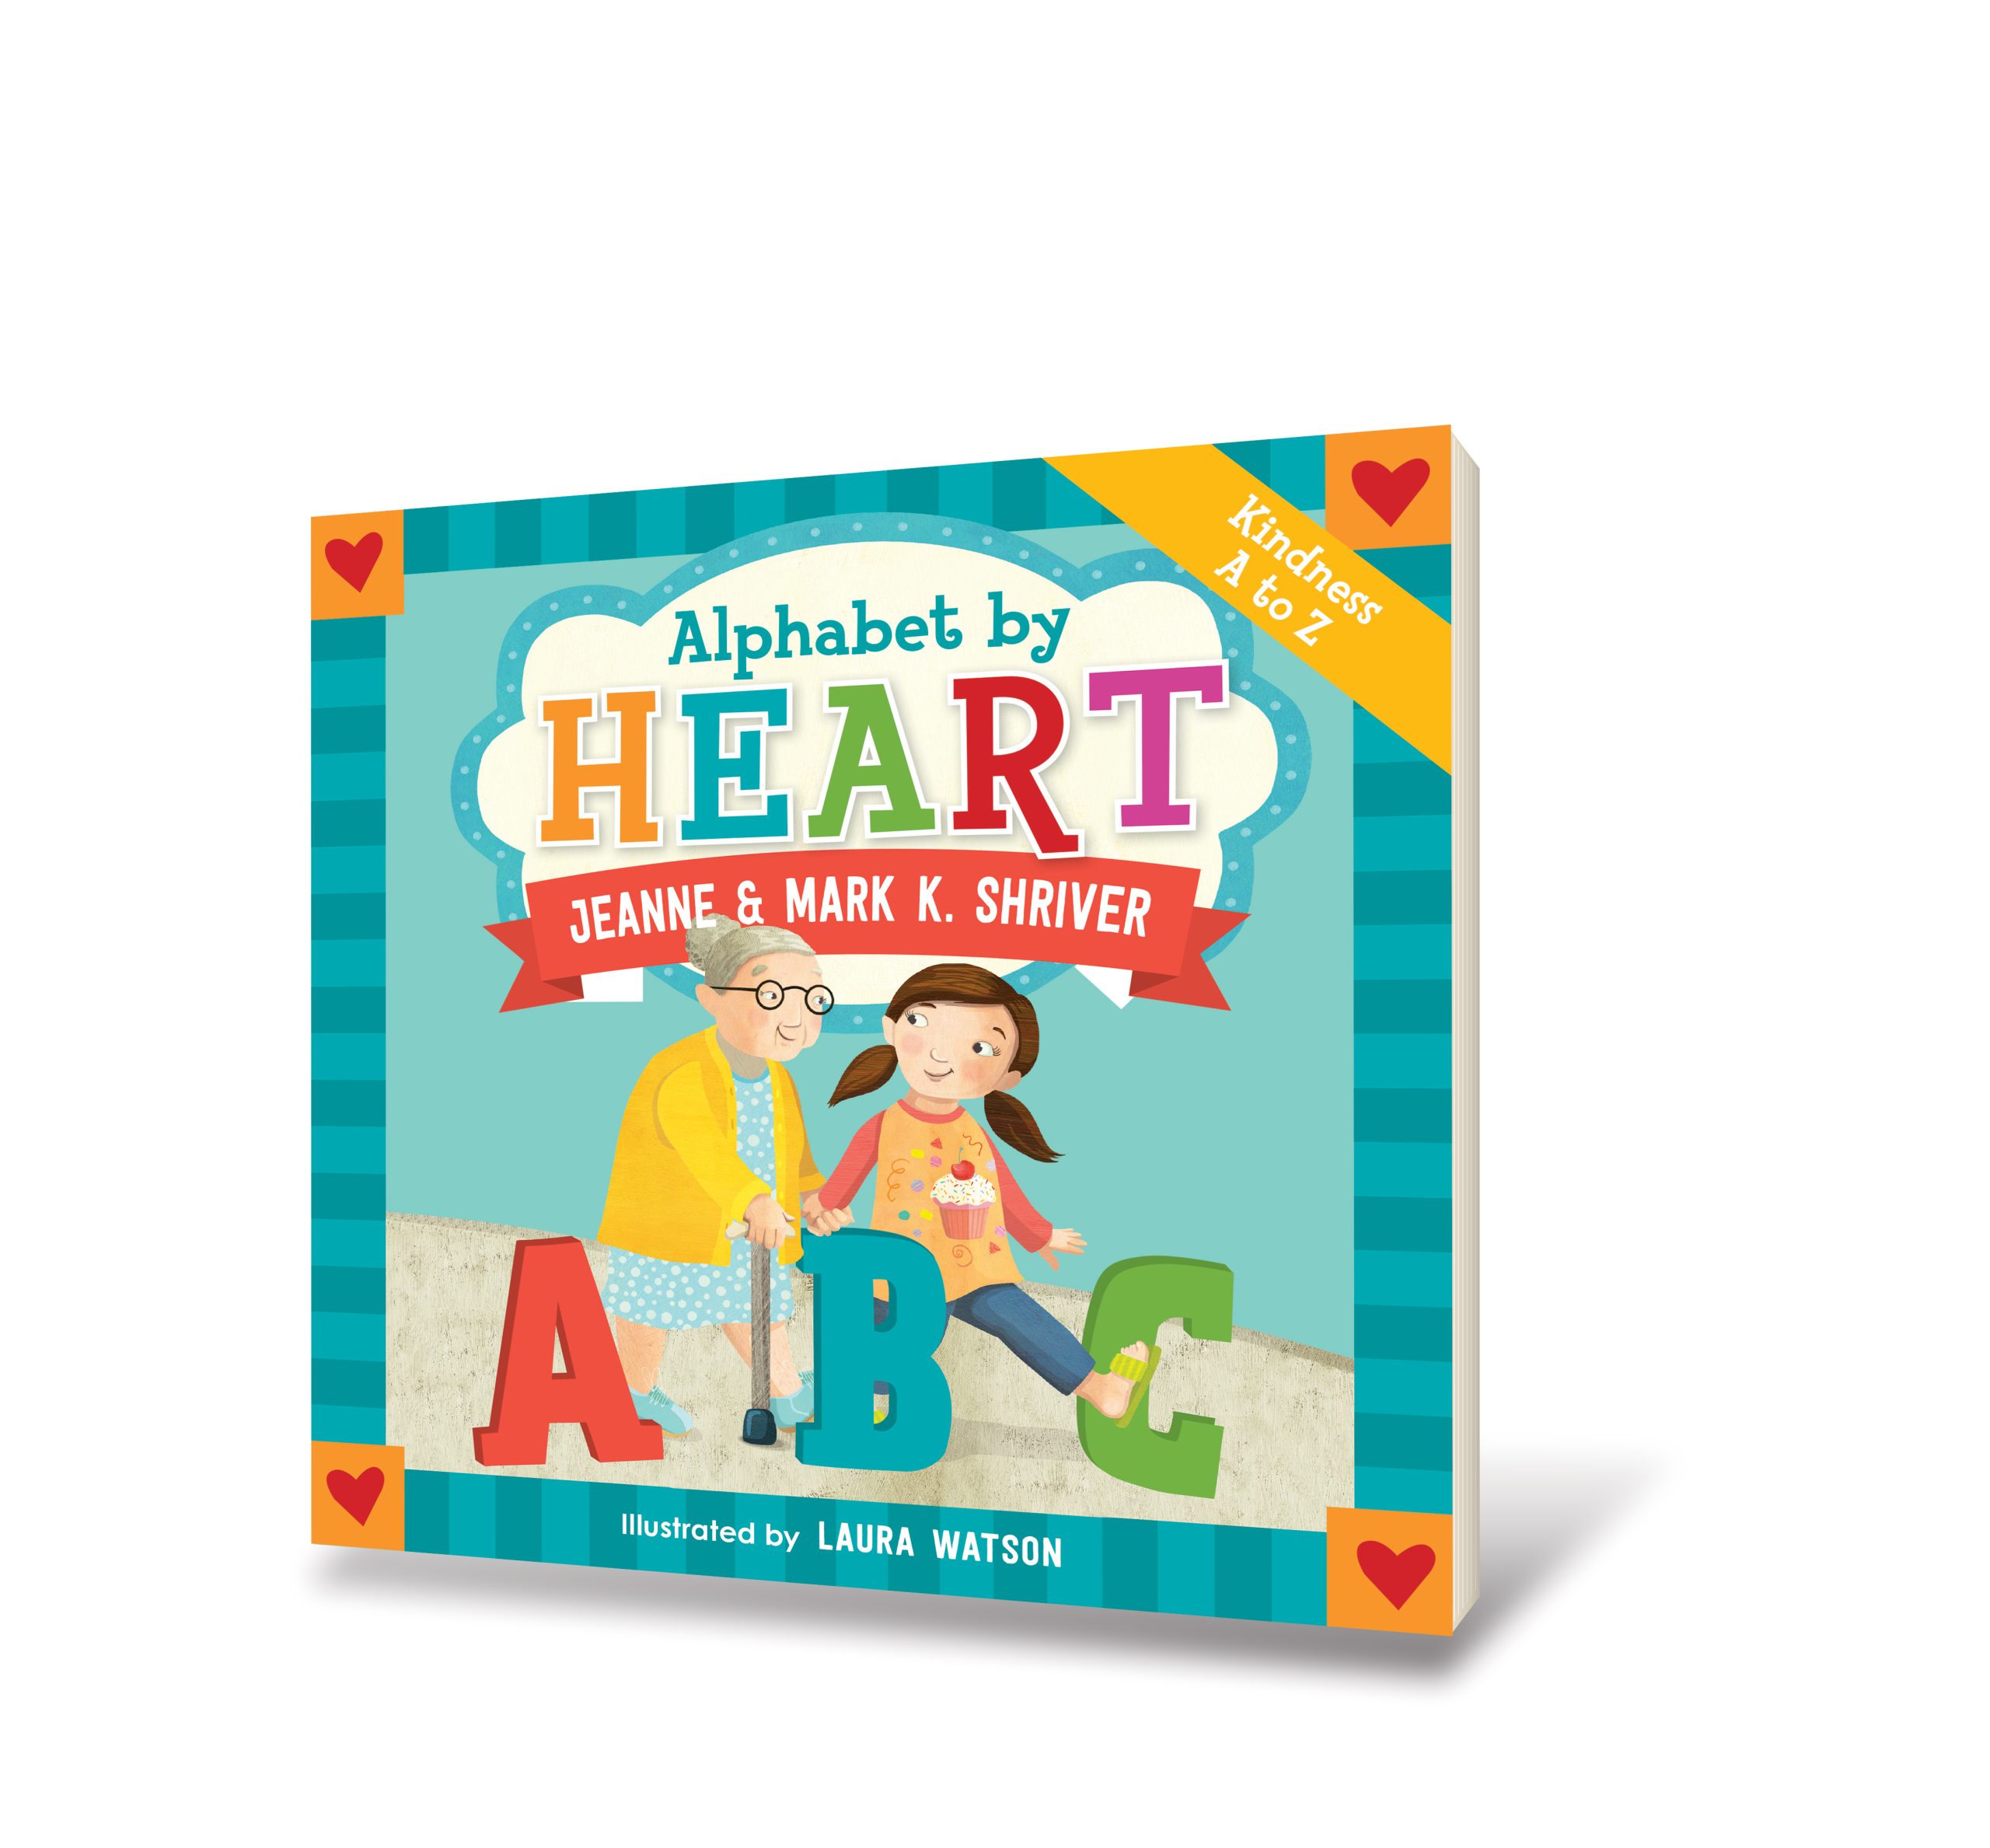 The Alphabet by Heart